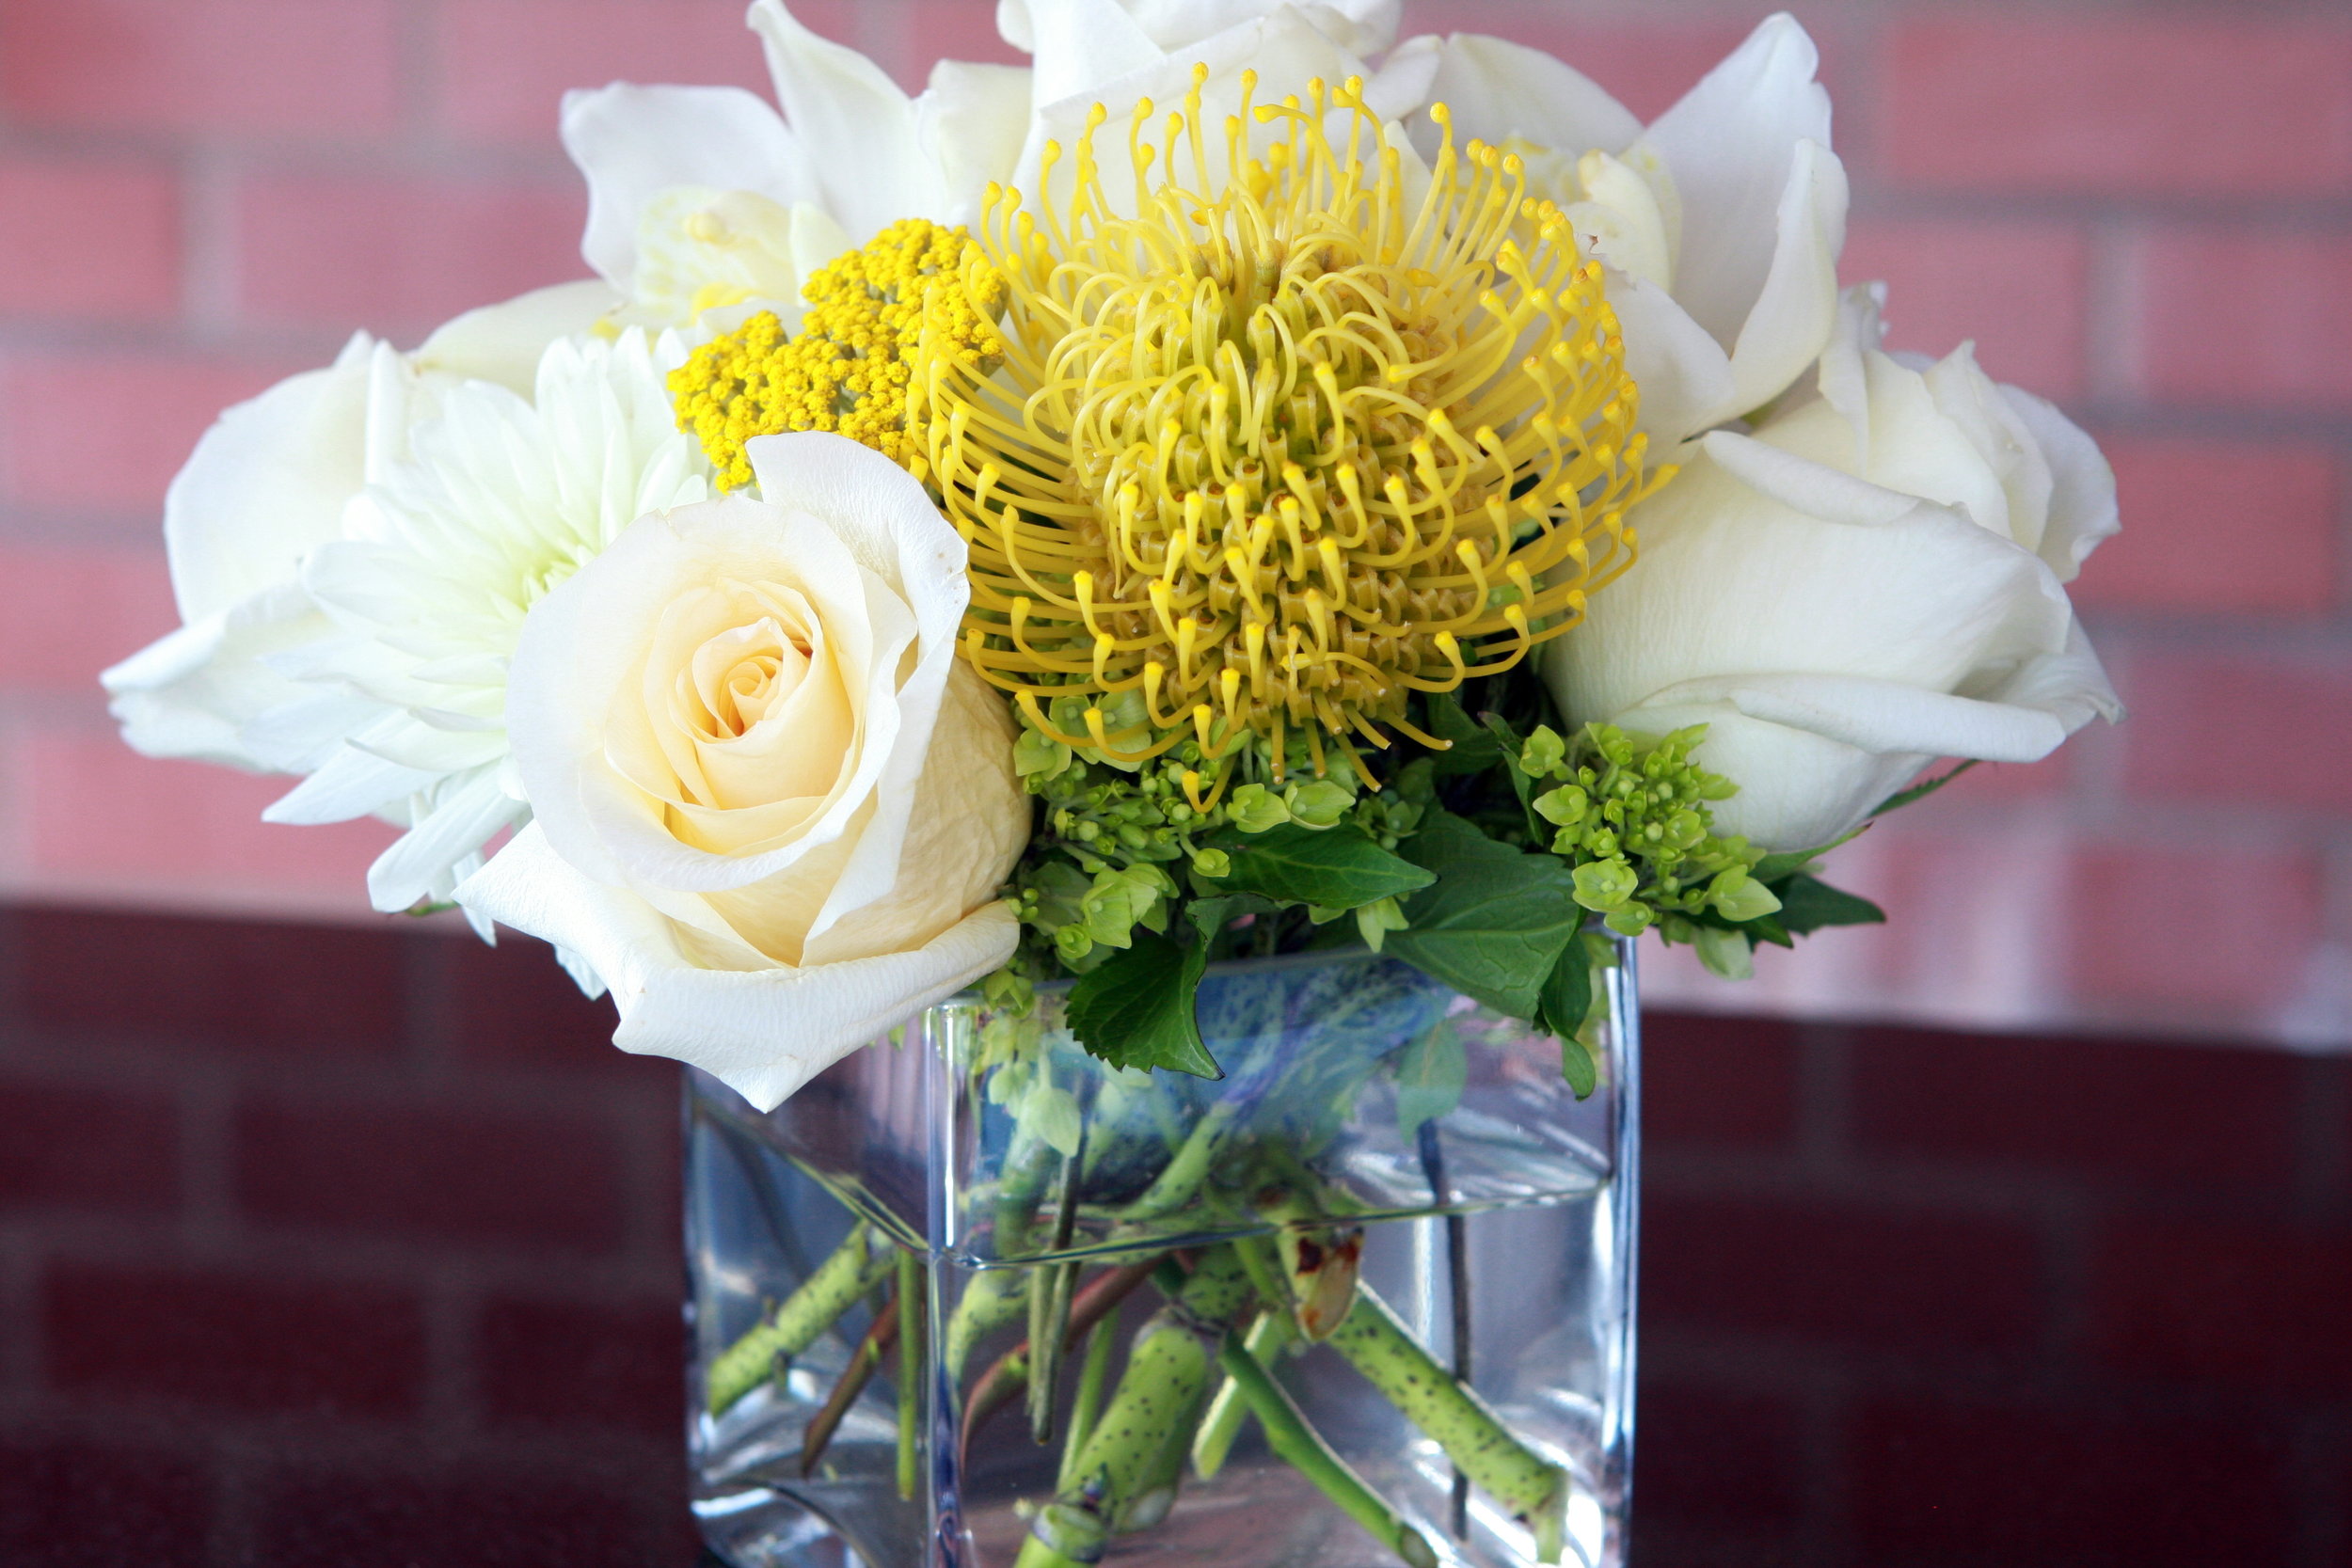 Square glass vase holding white roses and a yellow nodding pincushion flowers.